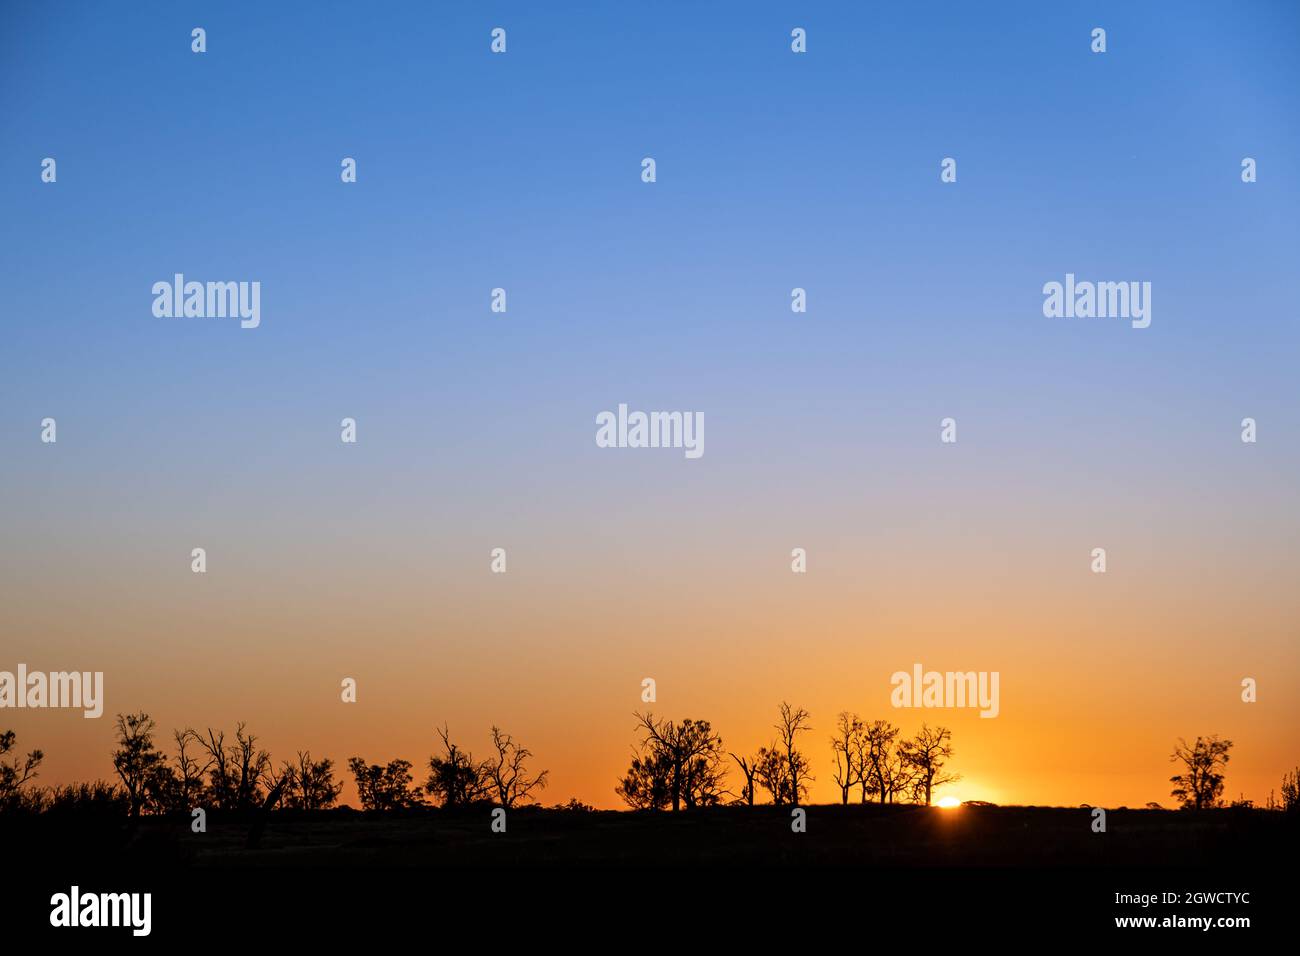 Sunset Over Trees With Smooth Color Gradients From Blue To Orange And Copy Space Stock Photo